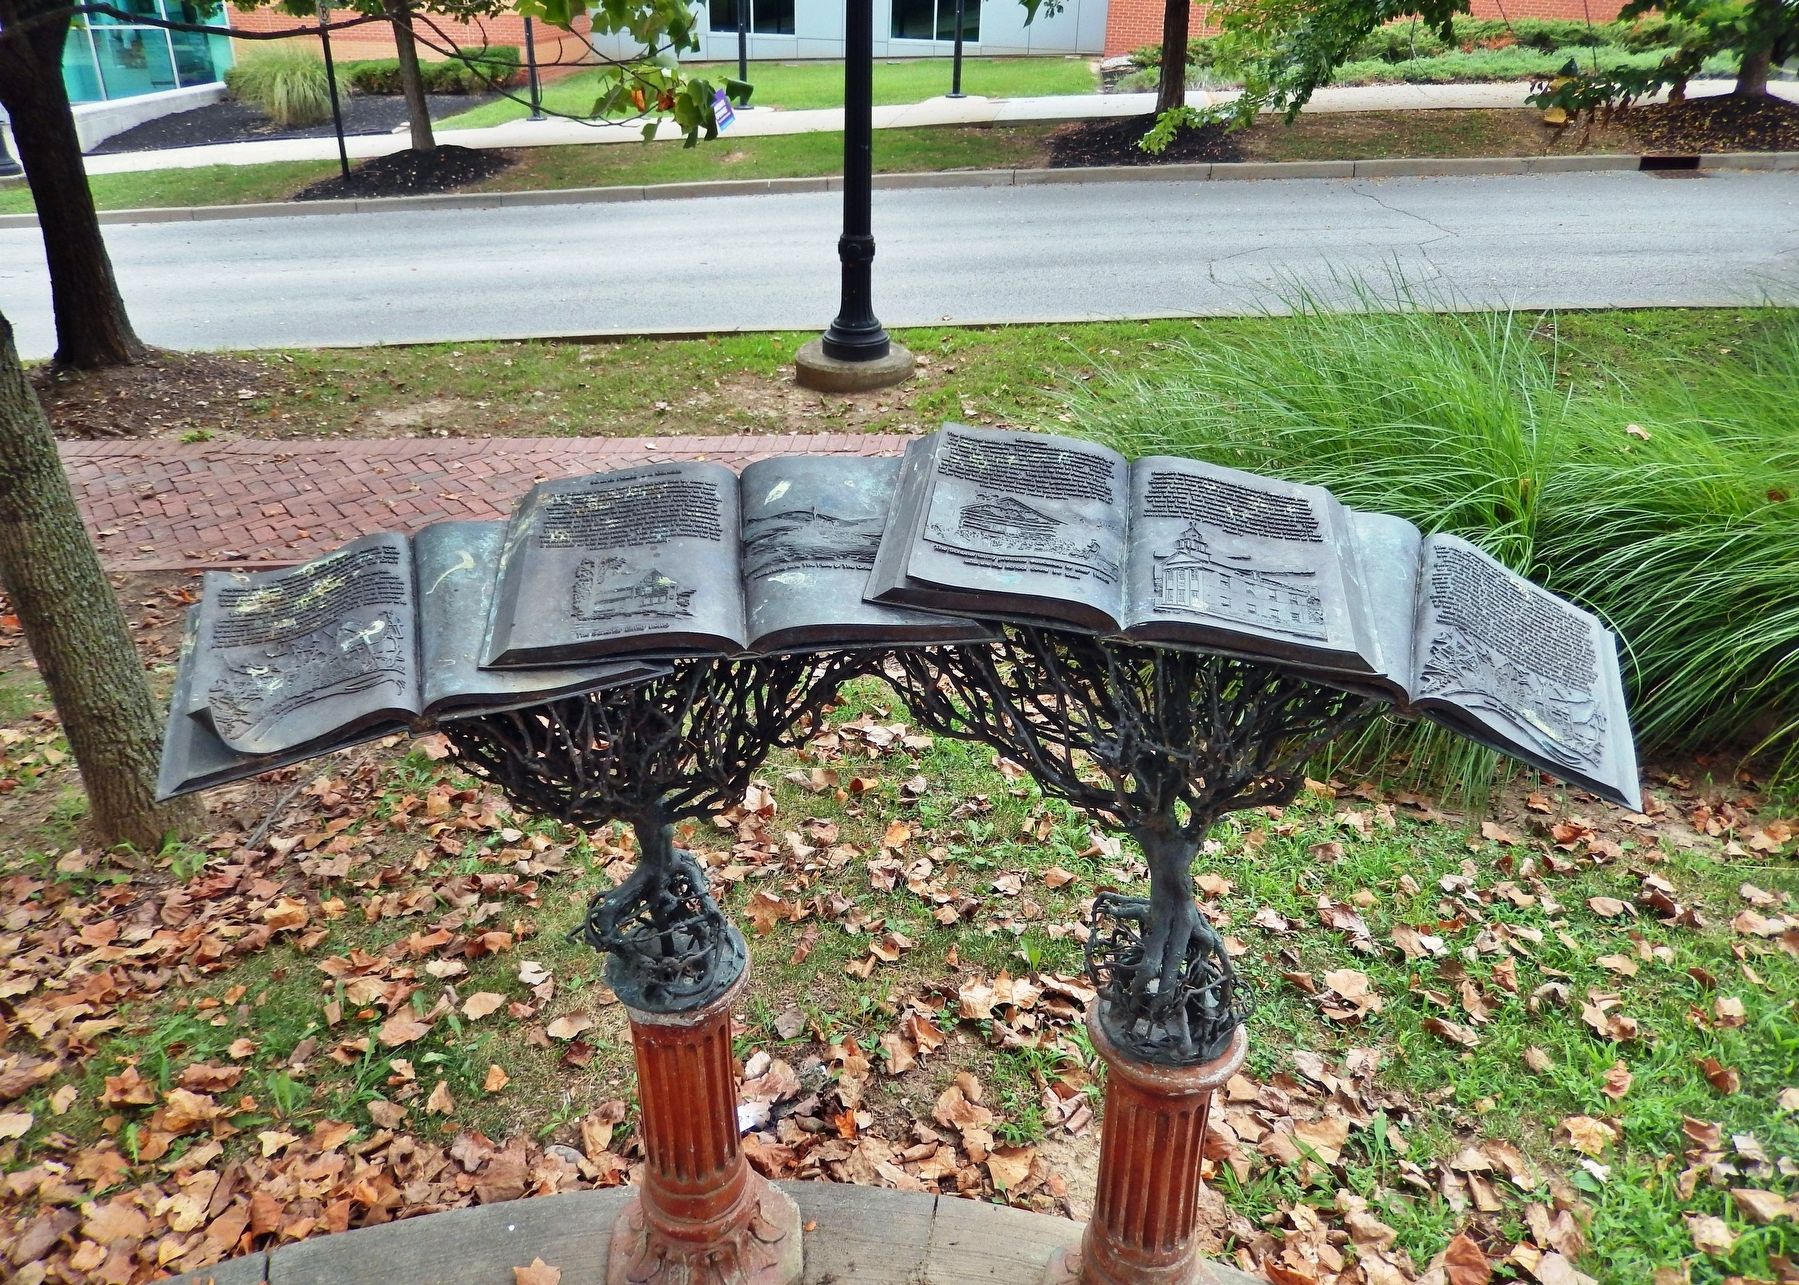 Founding of New Albany Marker/Sculpture image. Click for full size.